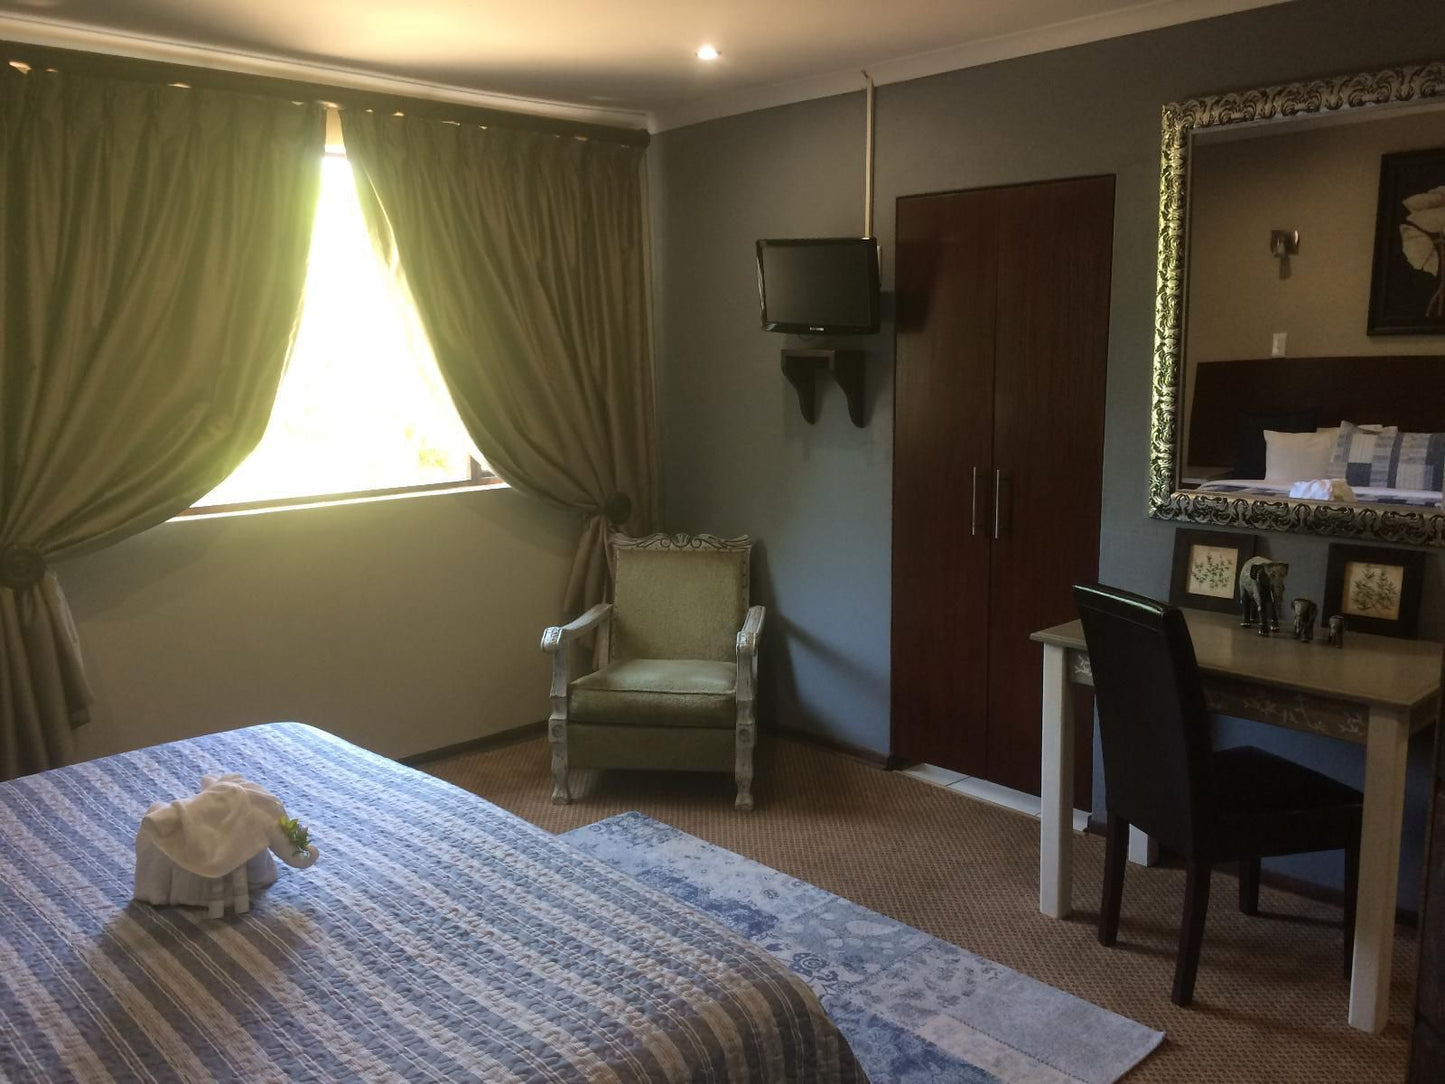 Monte Christo Country Lodge Spitskop Bloemfontein Free State South Africa 